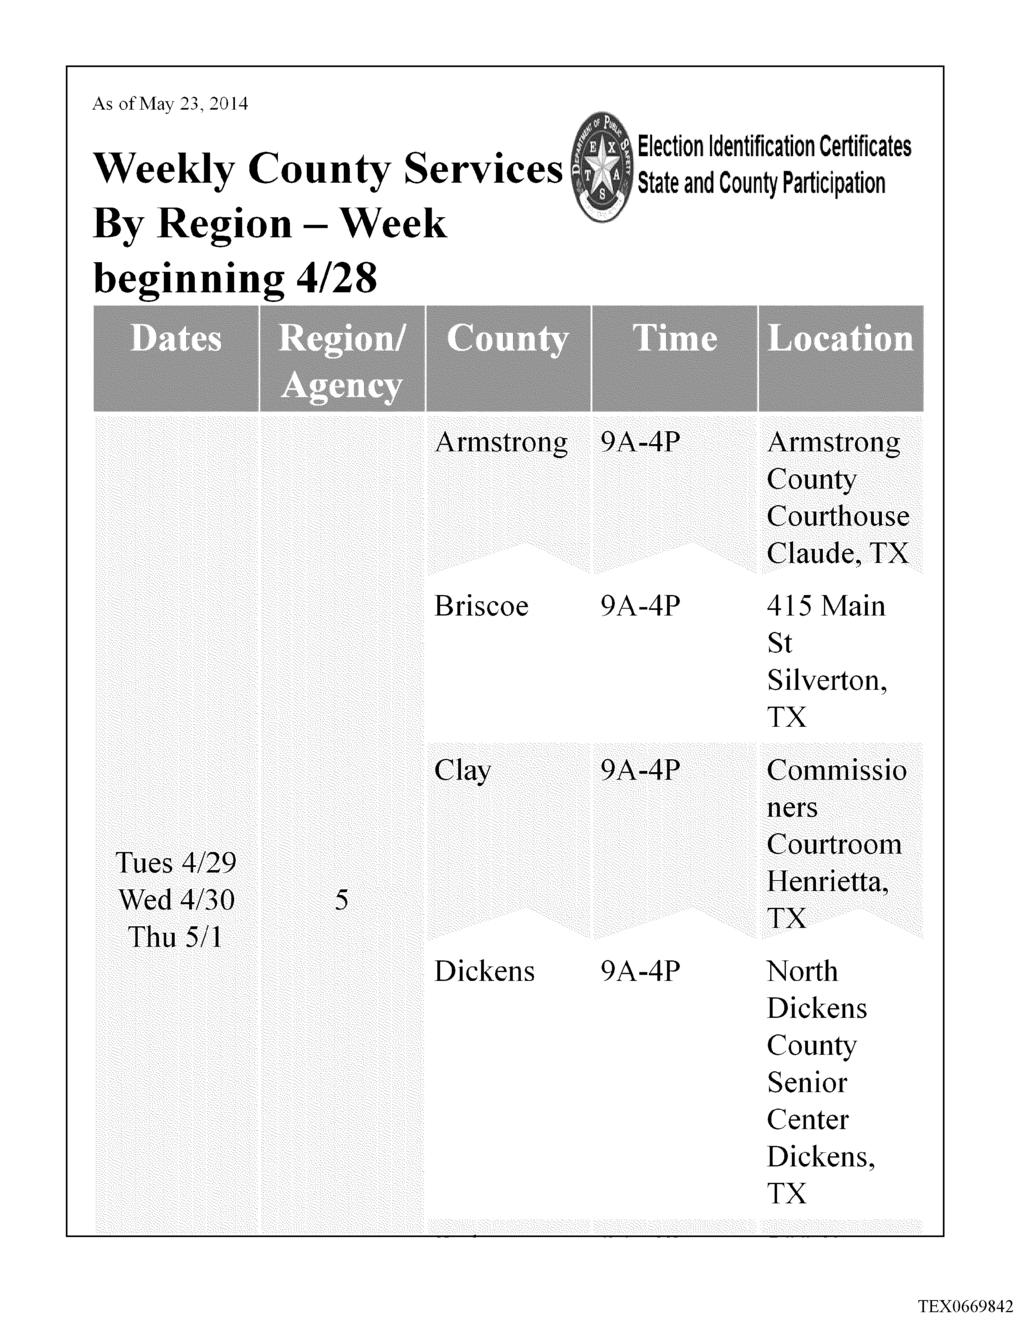 Case :13-cv-00193 Document 790-1 Filed in TXSD on 11/19/14 Page 10 of 1 Weekly Services By Region beginning 48 Week Election Identification Certificates State and Participation